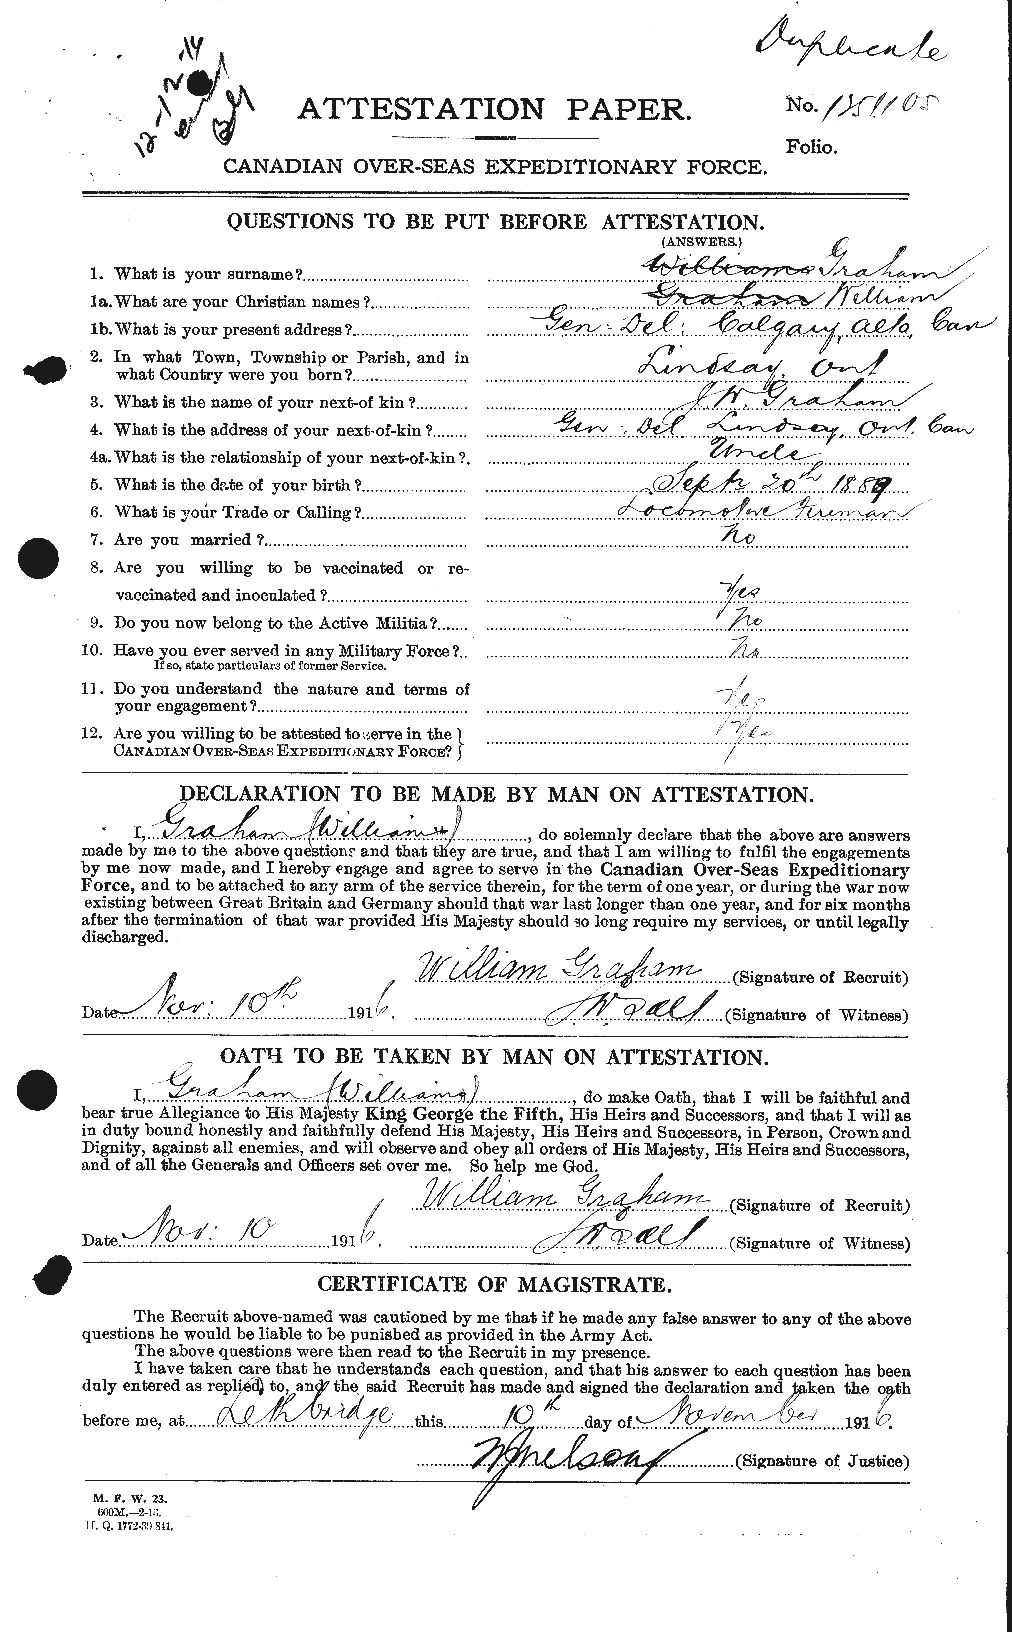 Personnel Records of the First World War - CEF 362707a